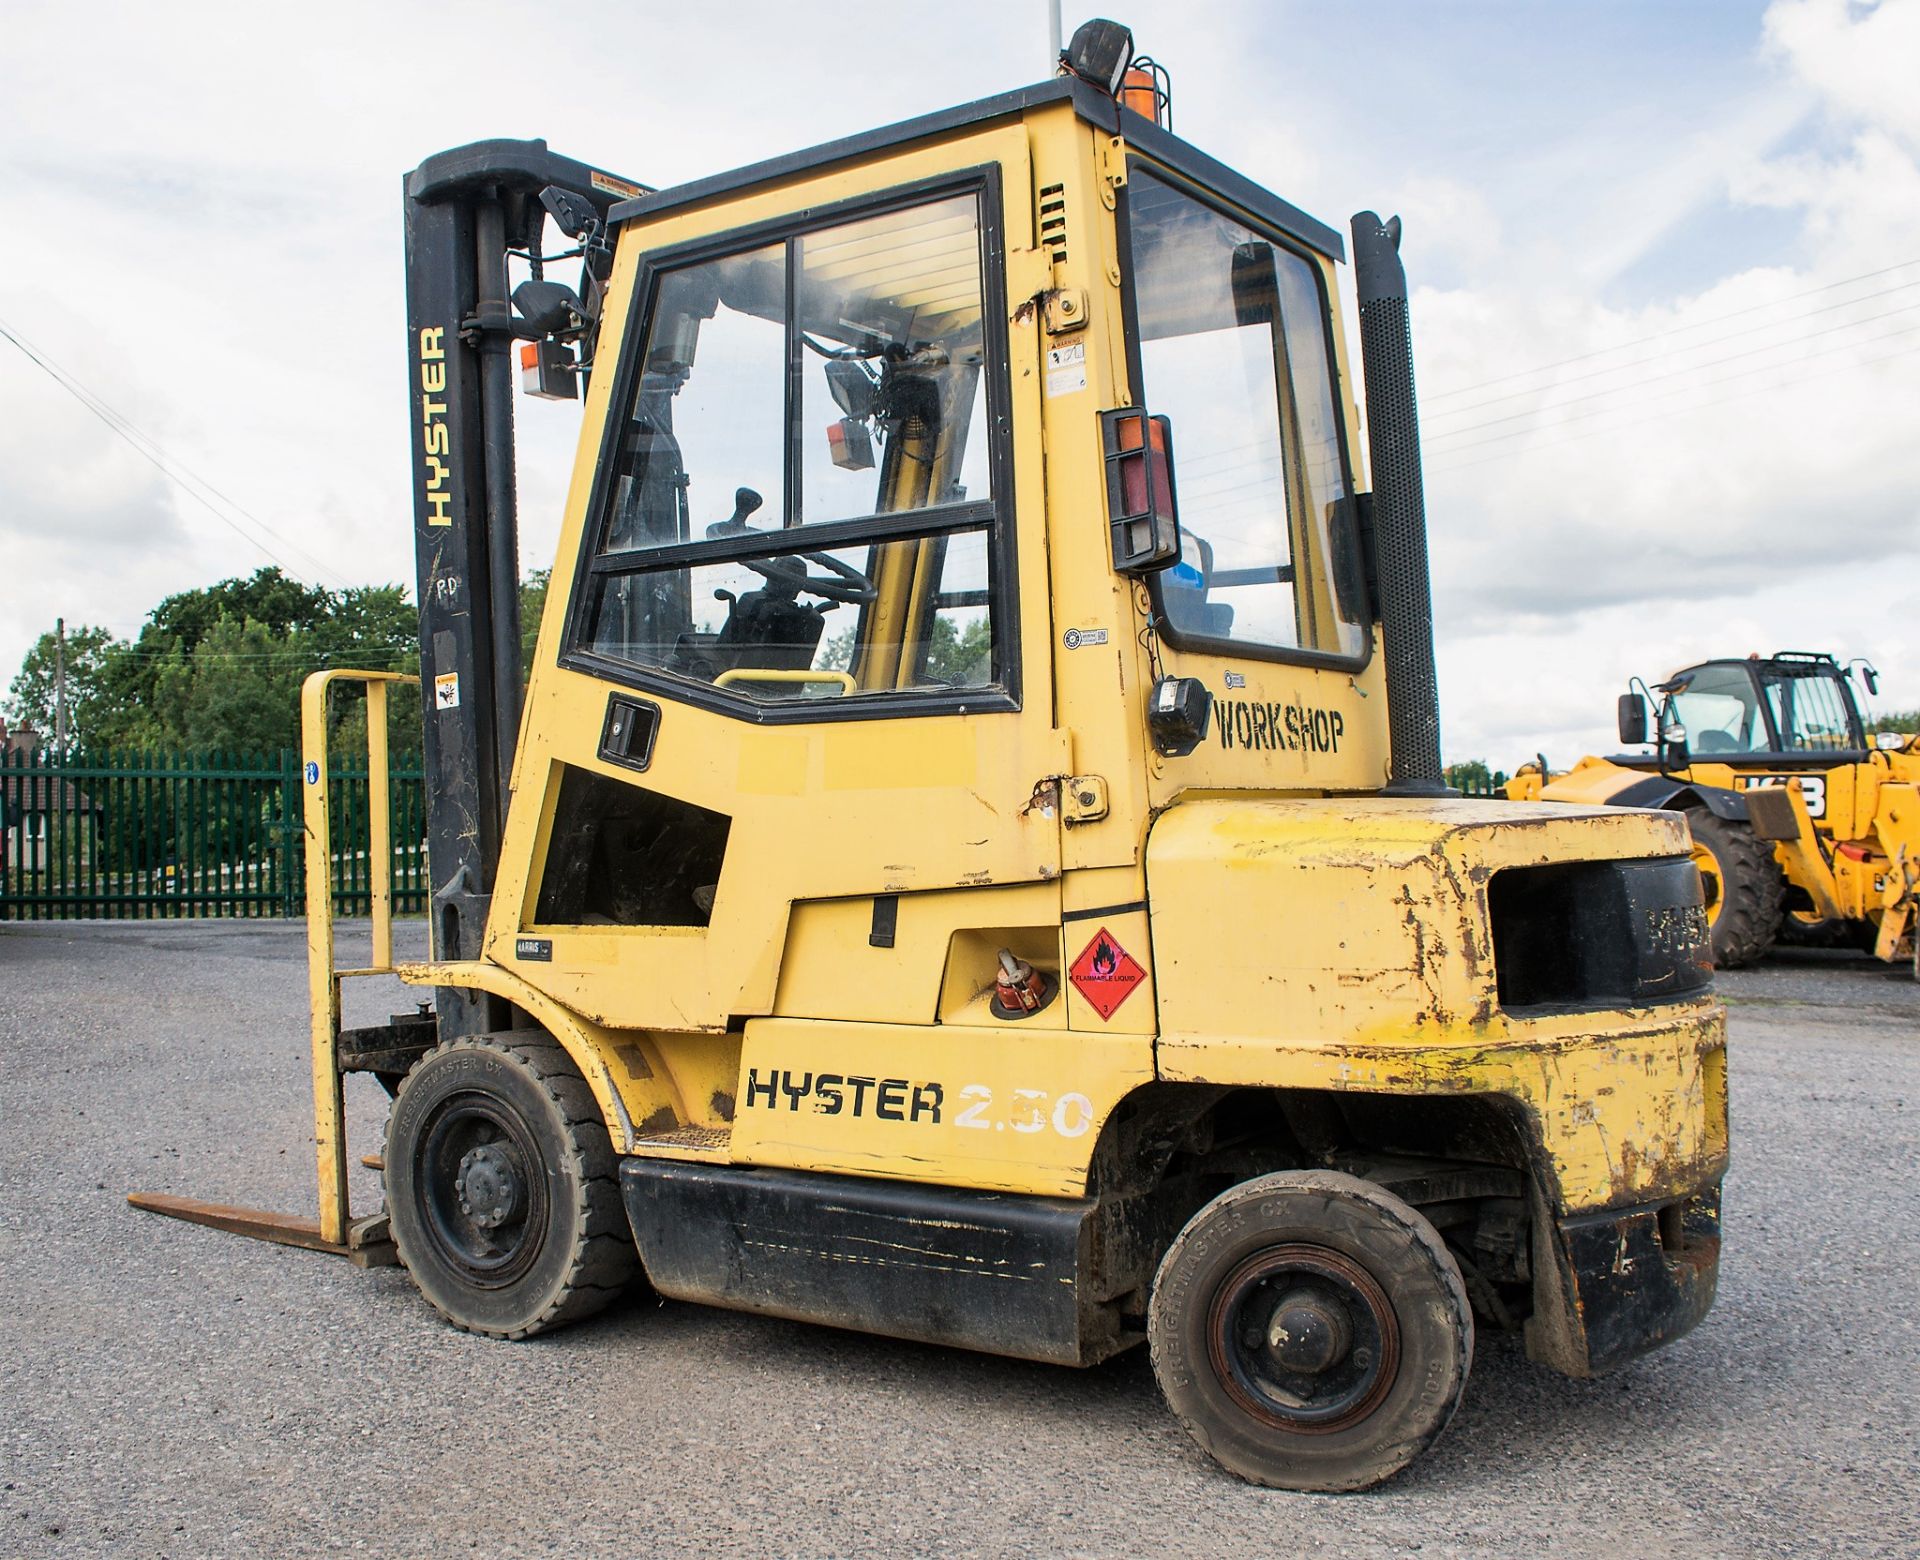 Hyster 2.50XM 2.5 tonne diesel driven fork lift truck Year: 1998 S/N: H177B06166V Recorded Hours: - Image 3 of 11